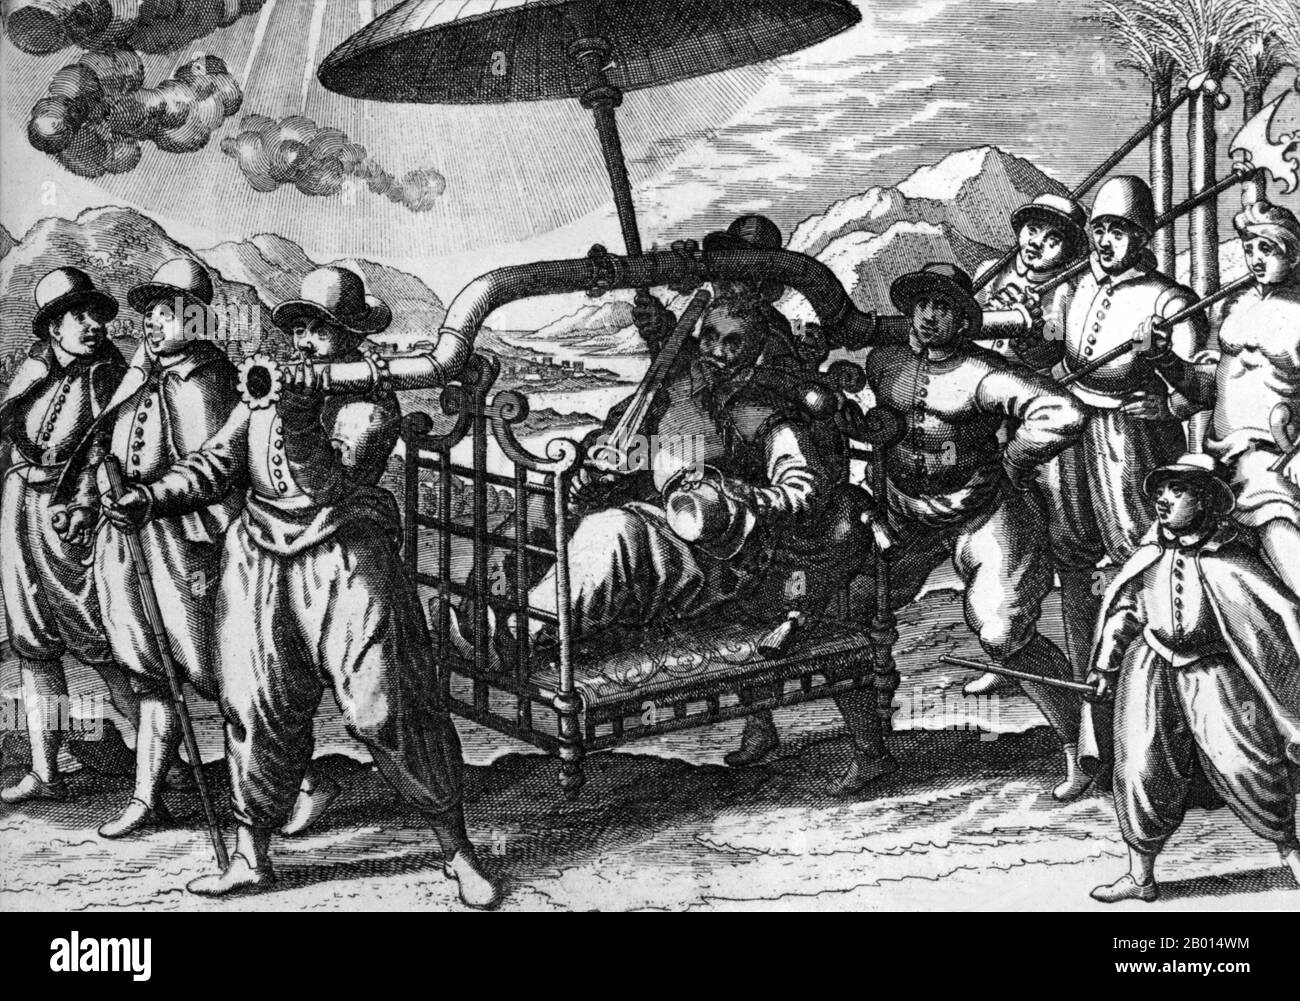 India/Portugal: A Portuguese merchant is carried on a palanquin by his Indian servants. Engraving by Joannes van Doetecum the Elder (1530-1605), c. 1596.  Under King Manuel I, the Portuguese set up a government in India in 1505, six years after the discovery of a sea route to Calicut in southwest India by Vasco da Gama. The Portuguese originally based their administration in Kochi/Cochin, in Kerala, but in 1510 moved to Goa. Until 1752, the ‘State of India’ included all Portuguese possessions in the Indian Ocean, from southern Africa to Southeast Asia, governed by either a Viceroy or Governor. Stock Photo